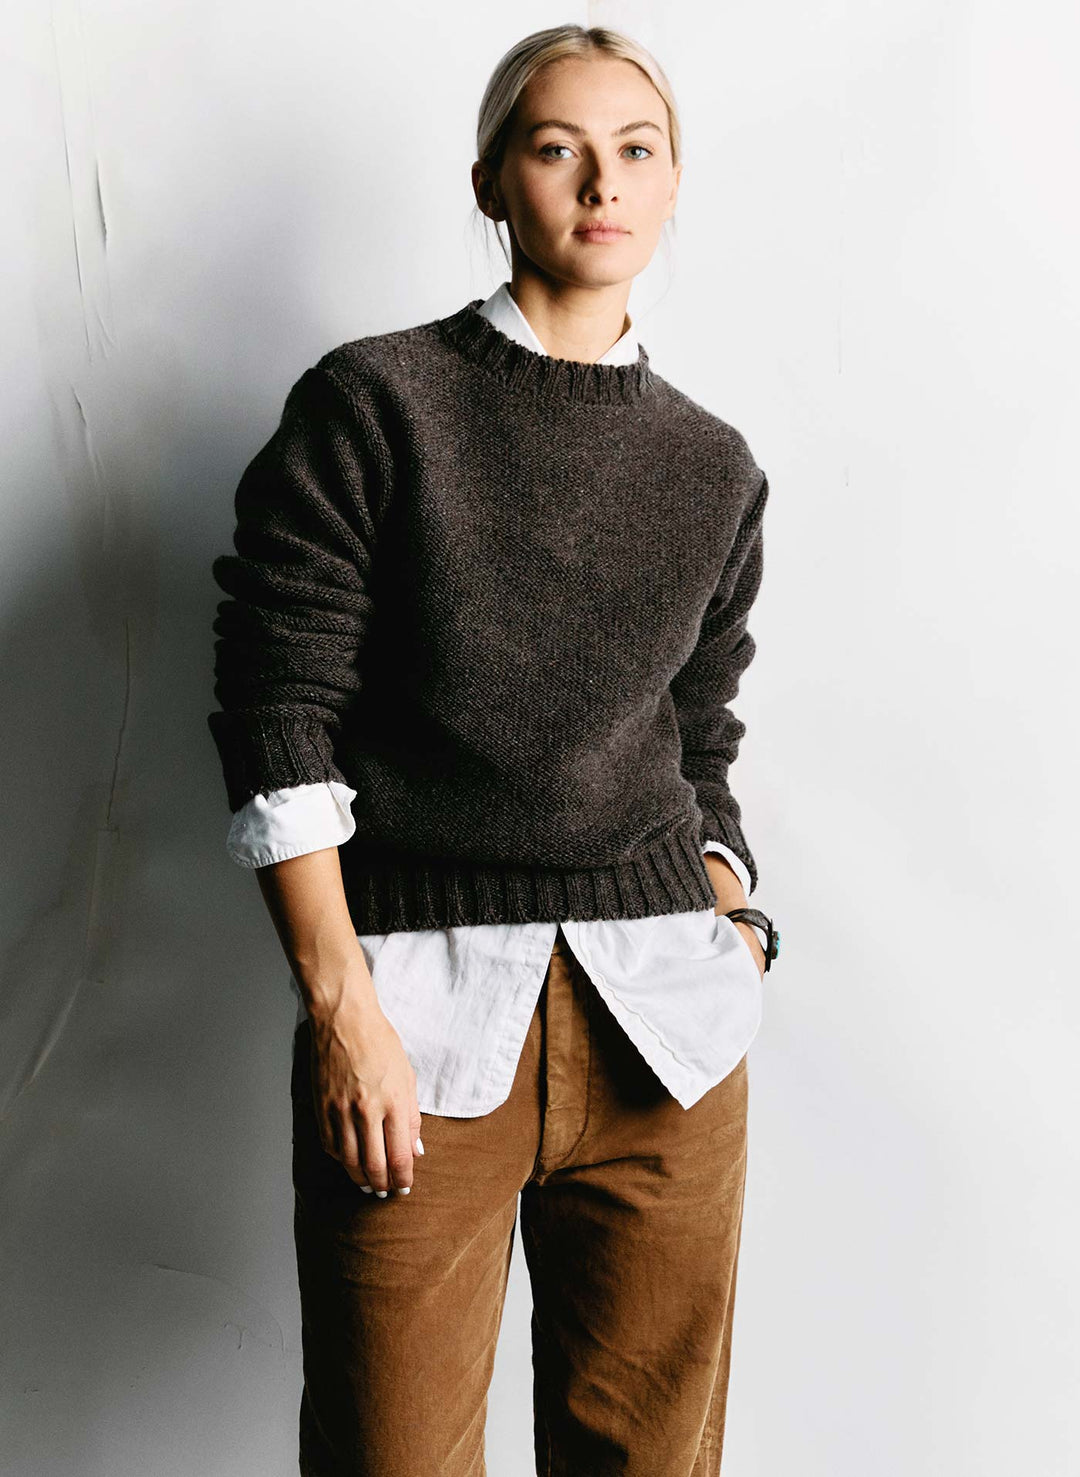 a woman in a sweater and brown pants